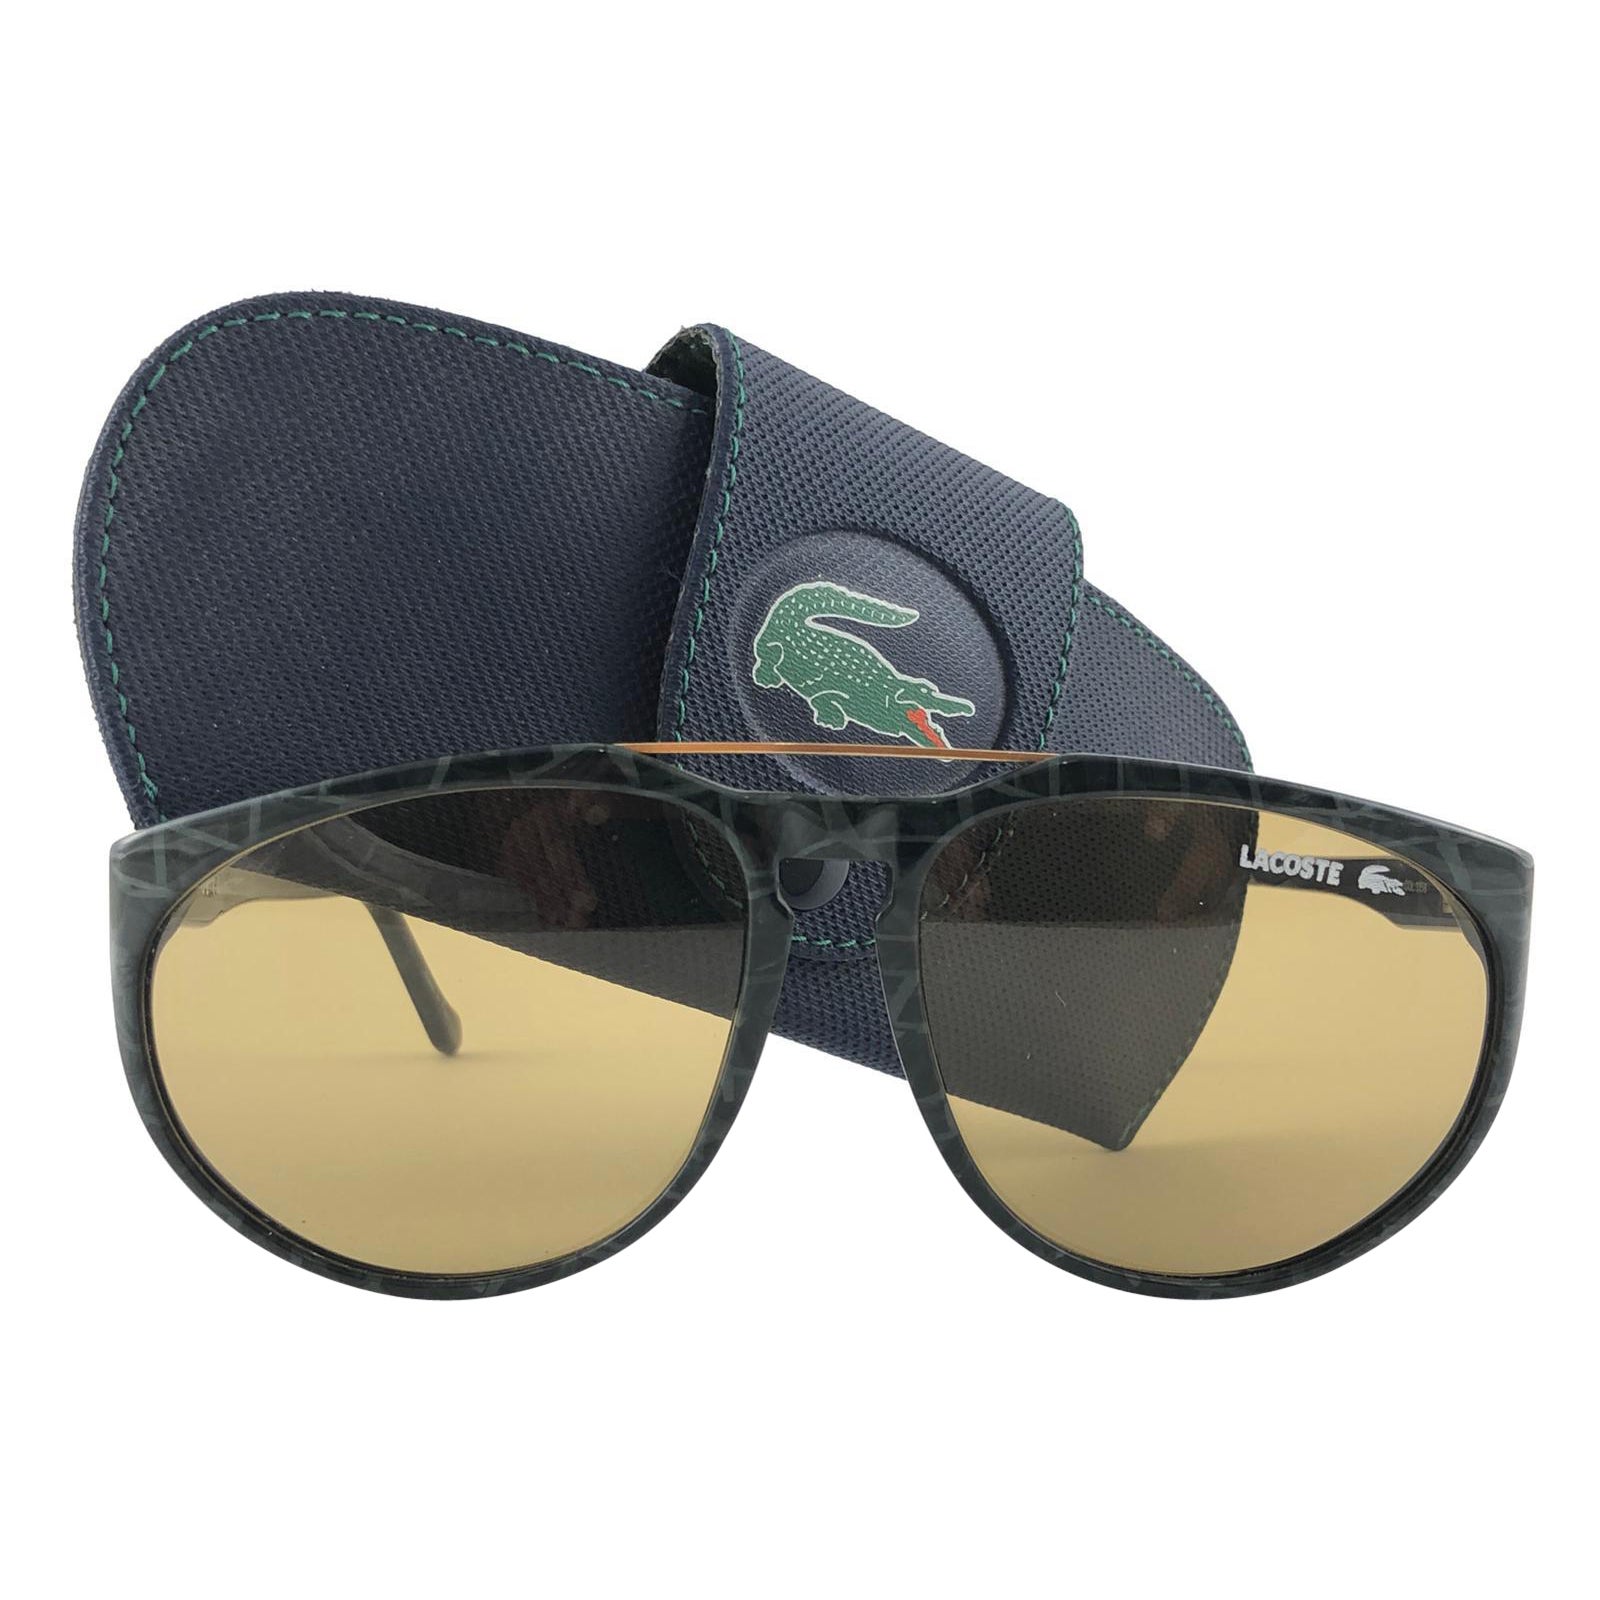 New Vintage Lacoste 133 Green & Gold Accents 1980's Sunglasses Made in France  For Sale